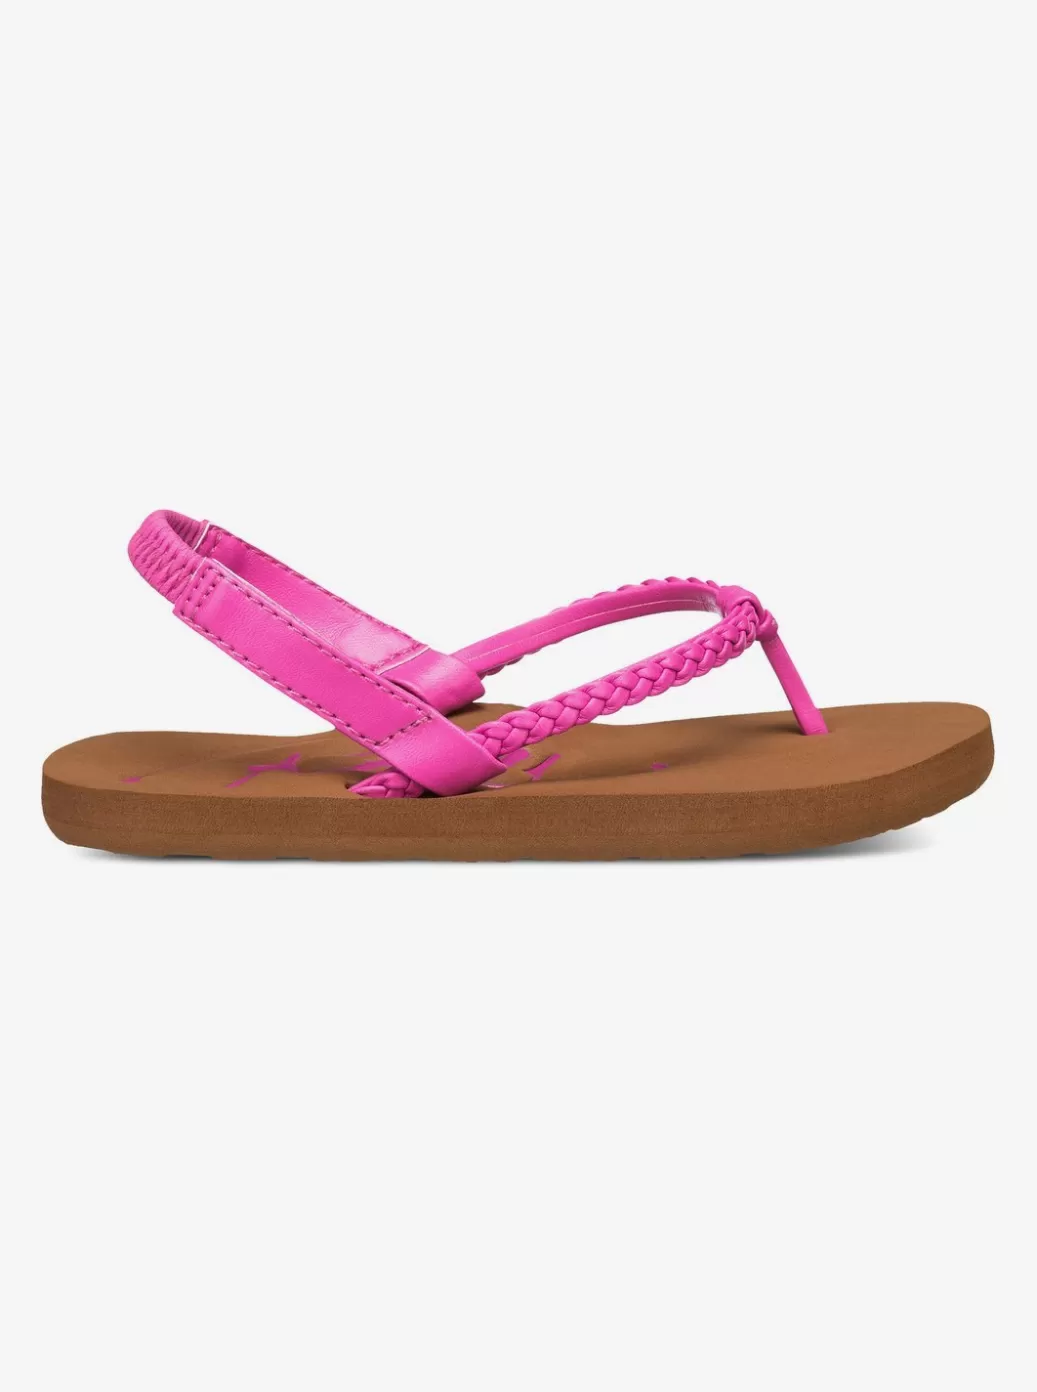 Shoes & Sandals | KIDS ROXY Girl's 2-7 Cabo Sandals Hot Pink